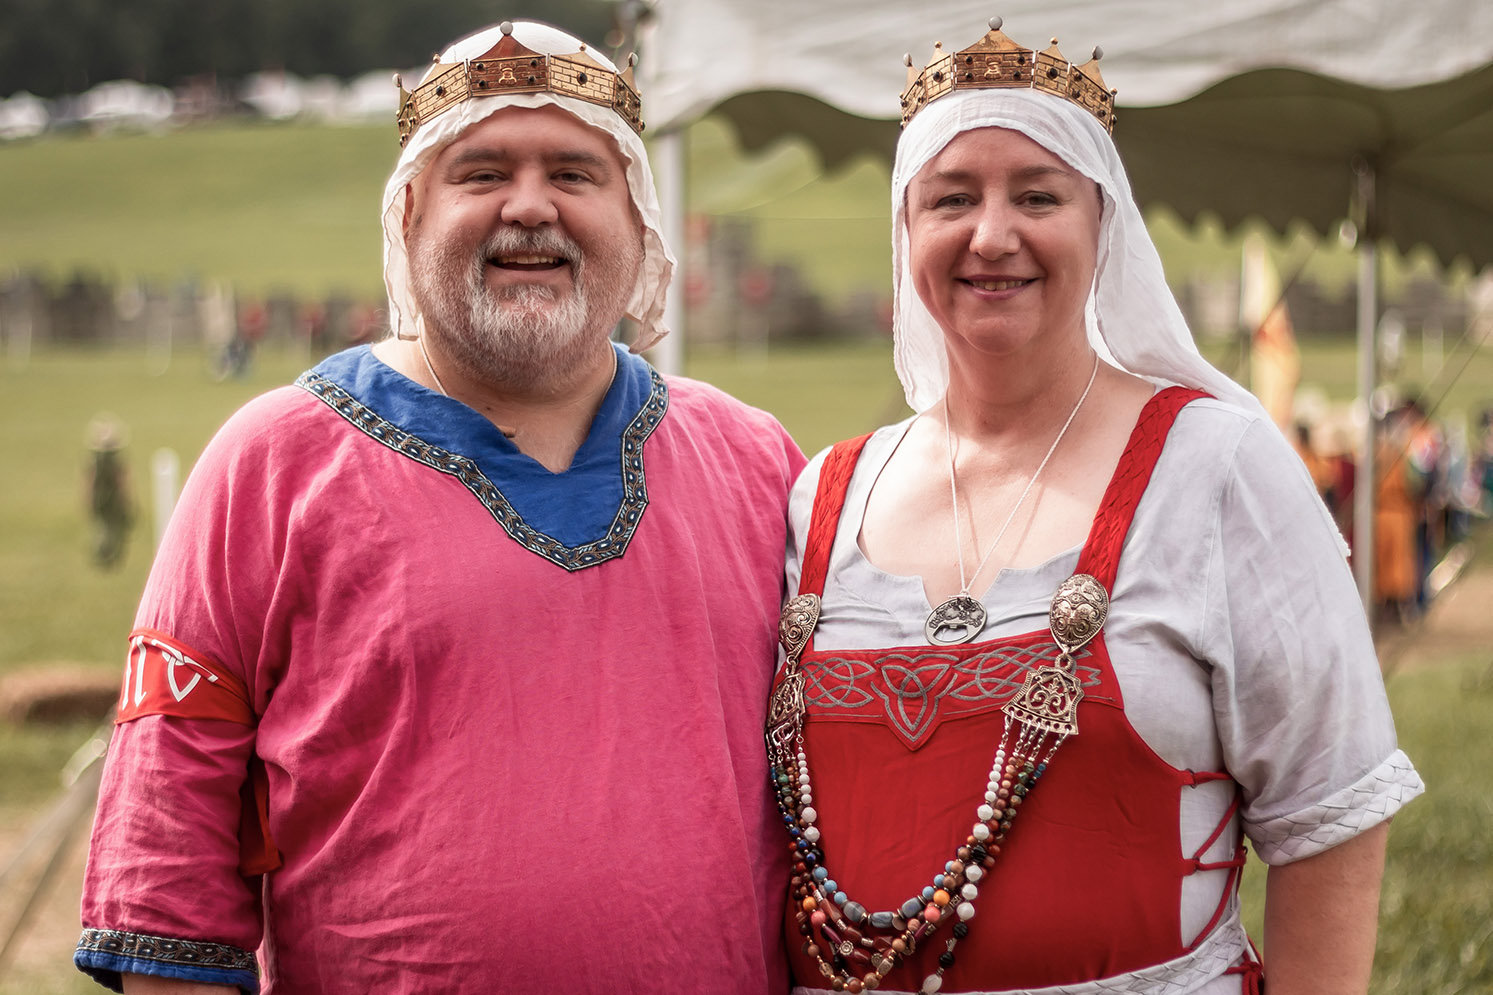 Portrait of Their Excellencies Baron Jørgen Lennertson and Baroness Meredyth Llwellyn at Pennsic 50